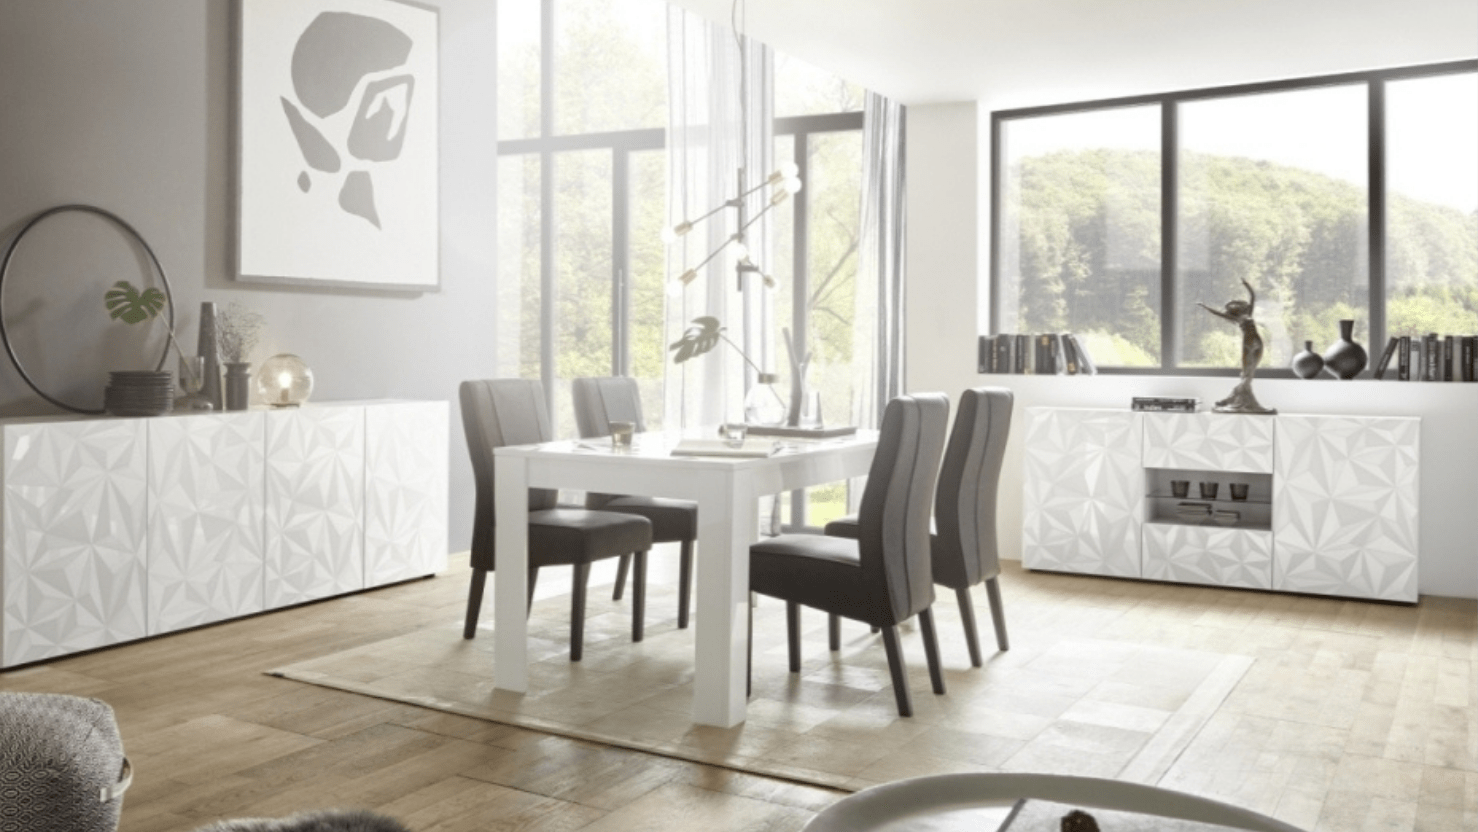 The Trends in Table Design – What to Expect from Dining Tables in 2022